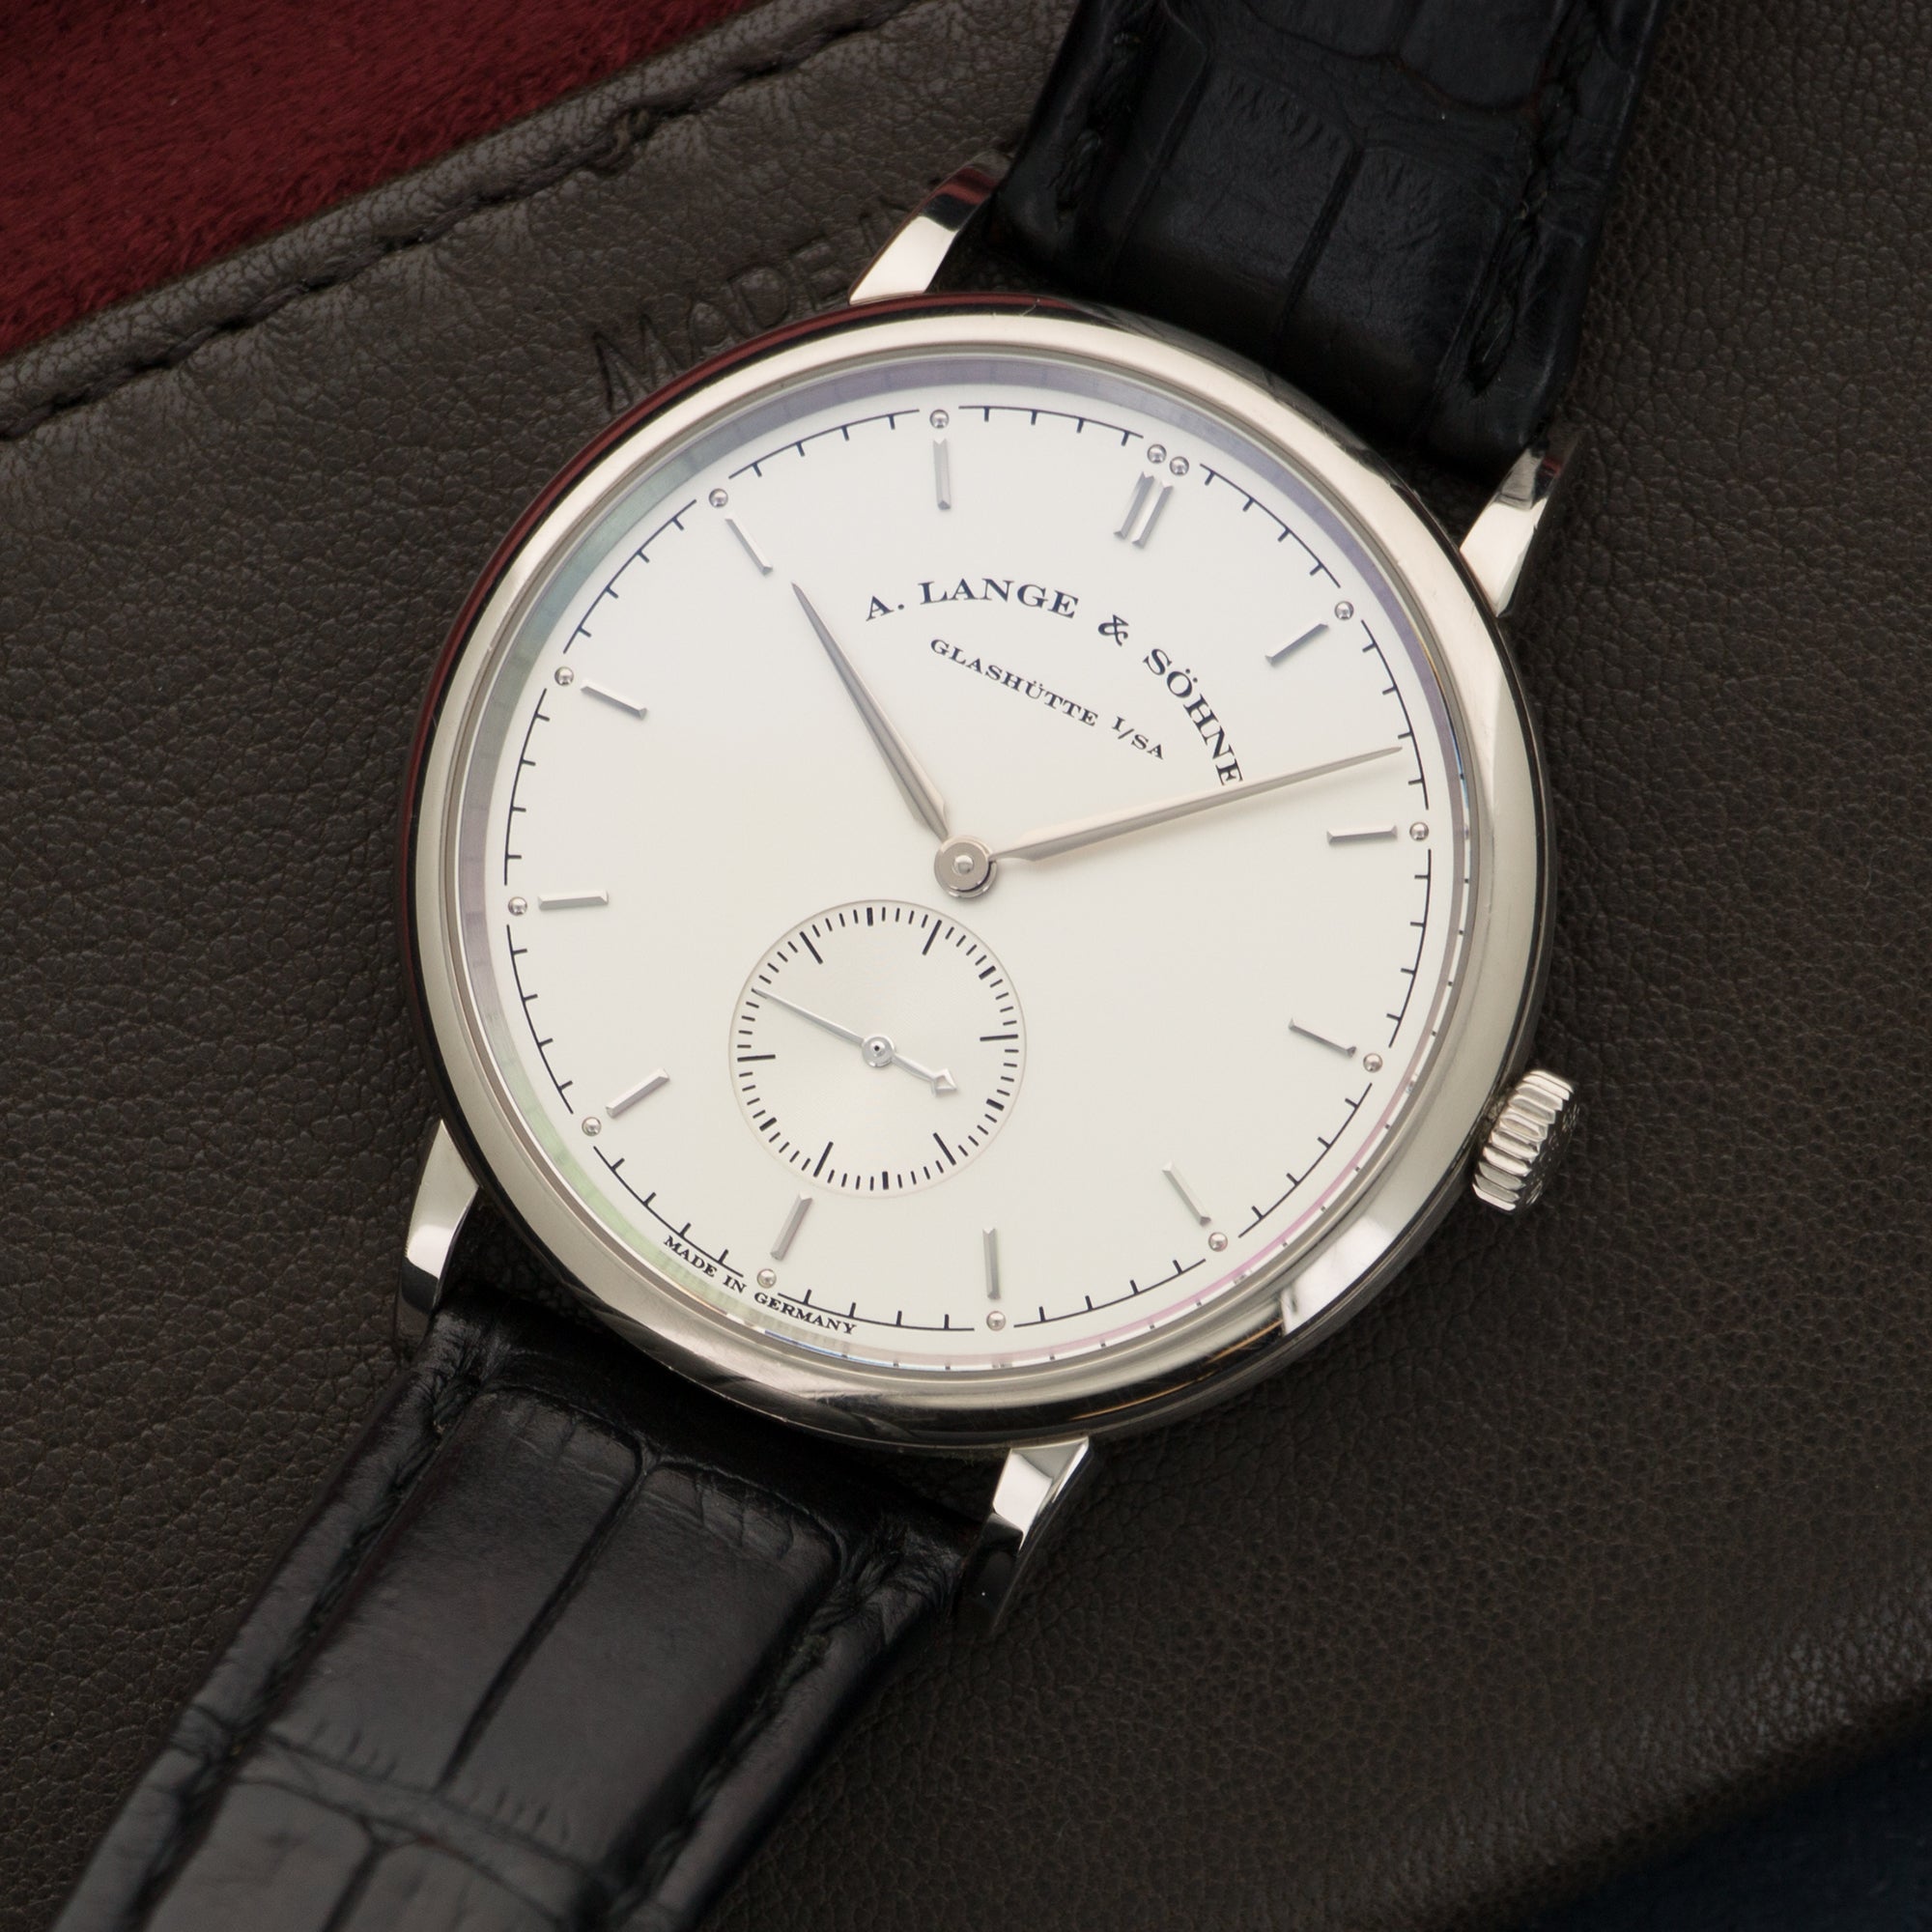 A. Lange & Sohne - A. Lange & Sohne White Gold Saxonia Watch Ref. 216.026 - The Keystone Watches